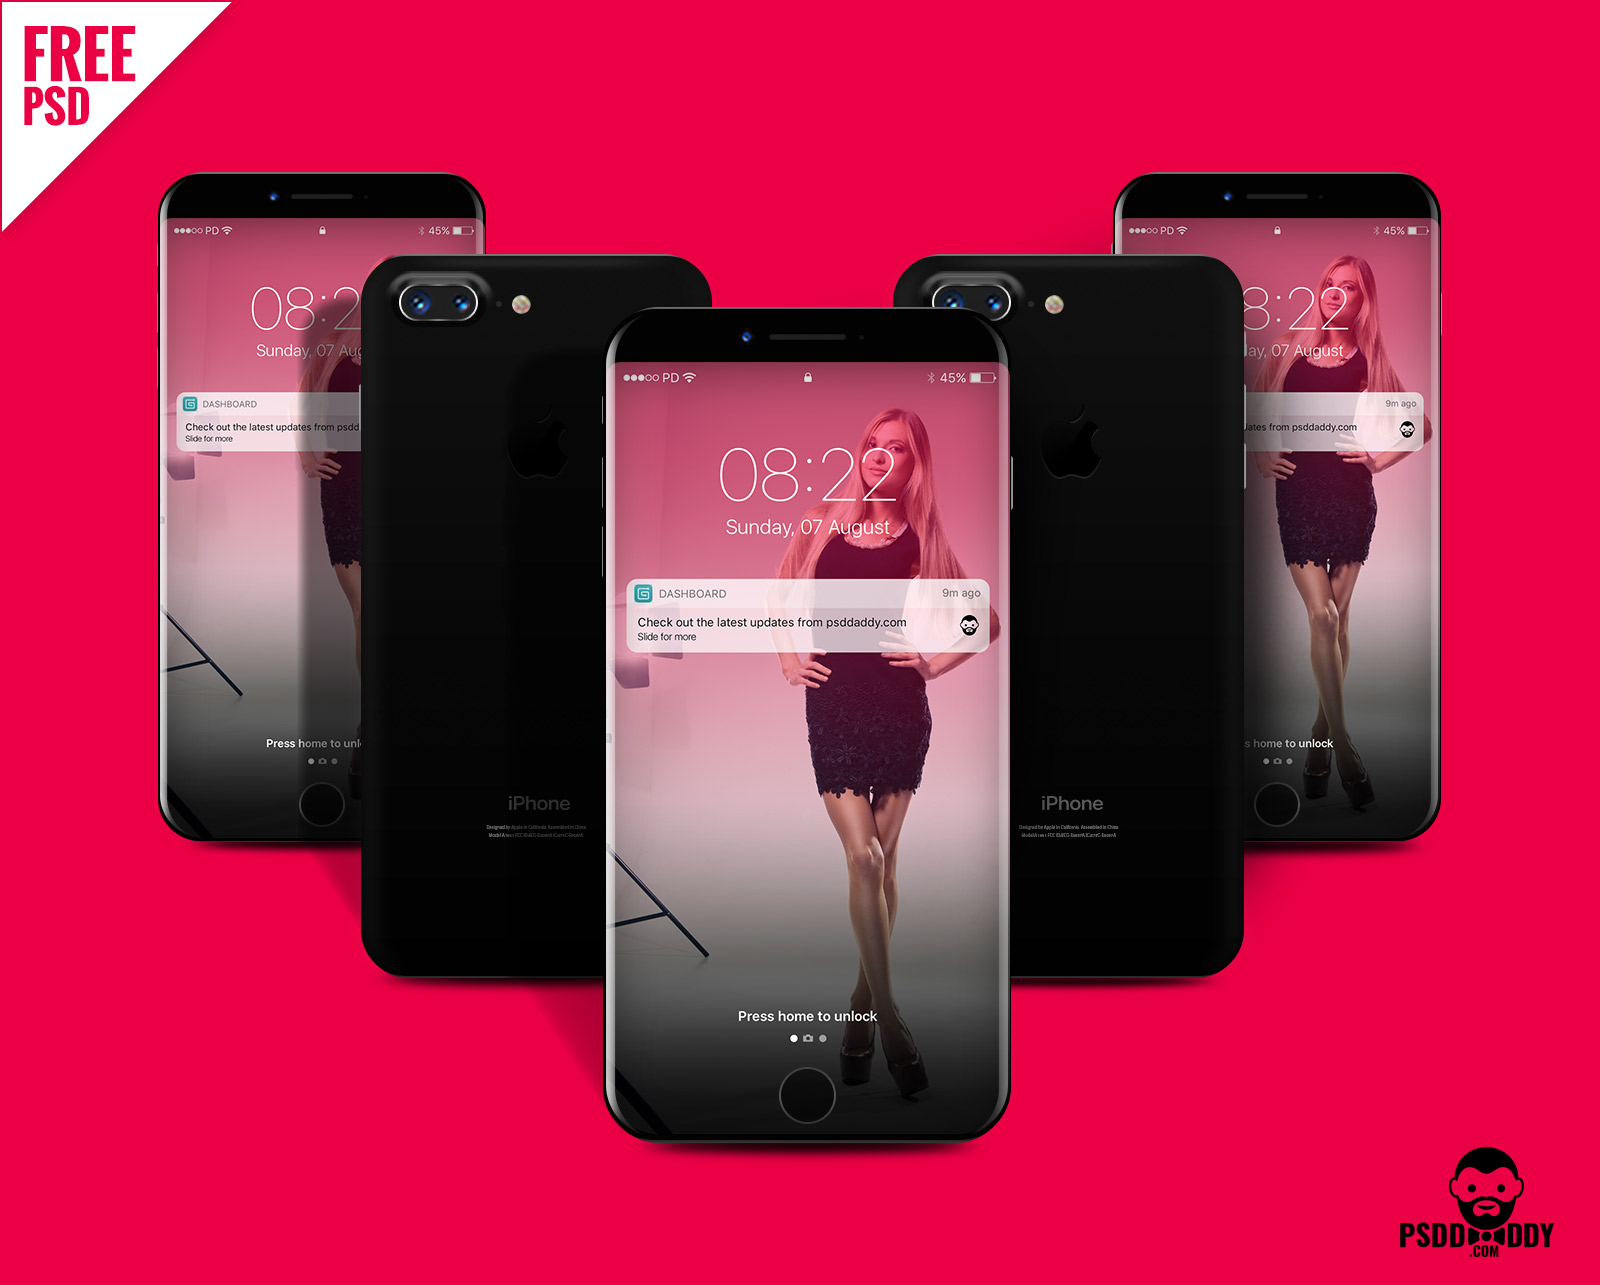 Download 30+ Awesome FREE PSD iPhone Mockups for Exclusive ...